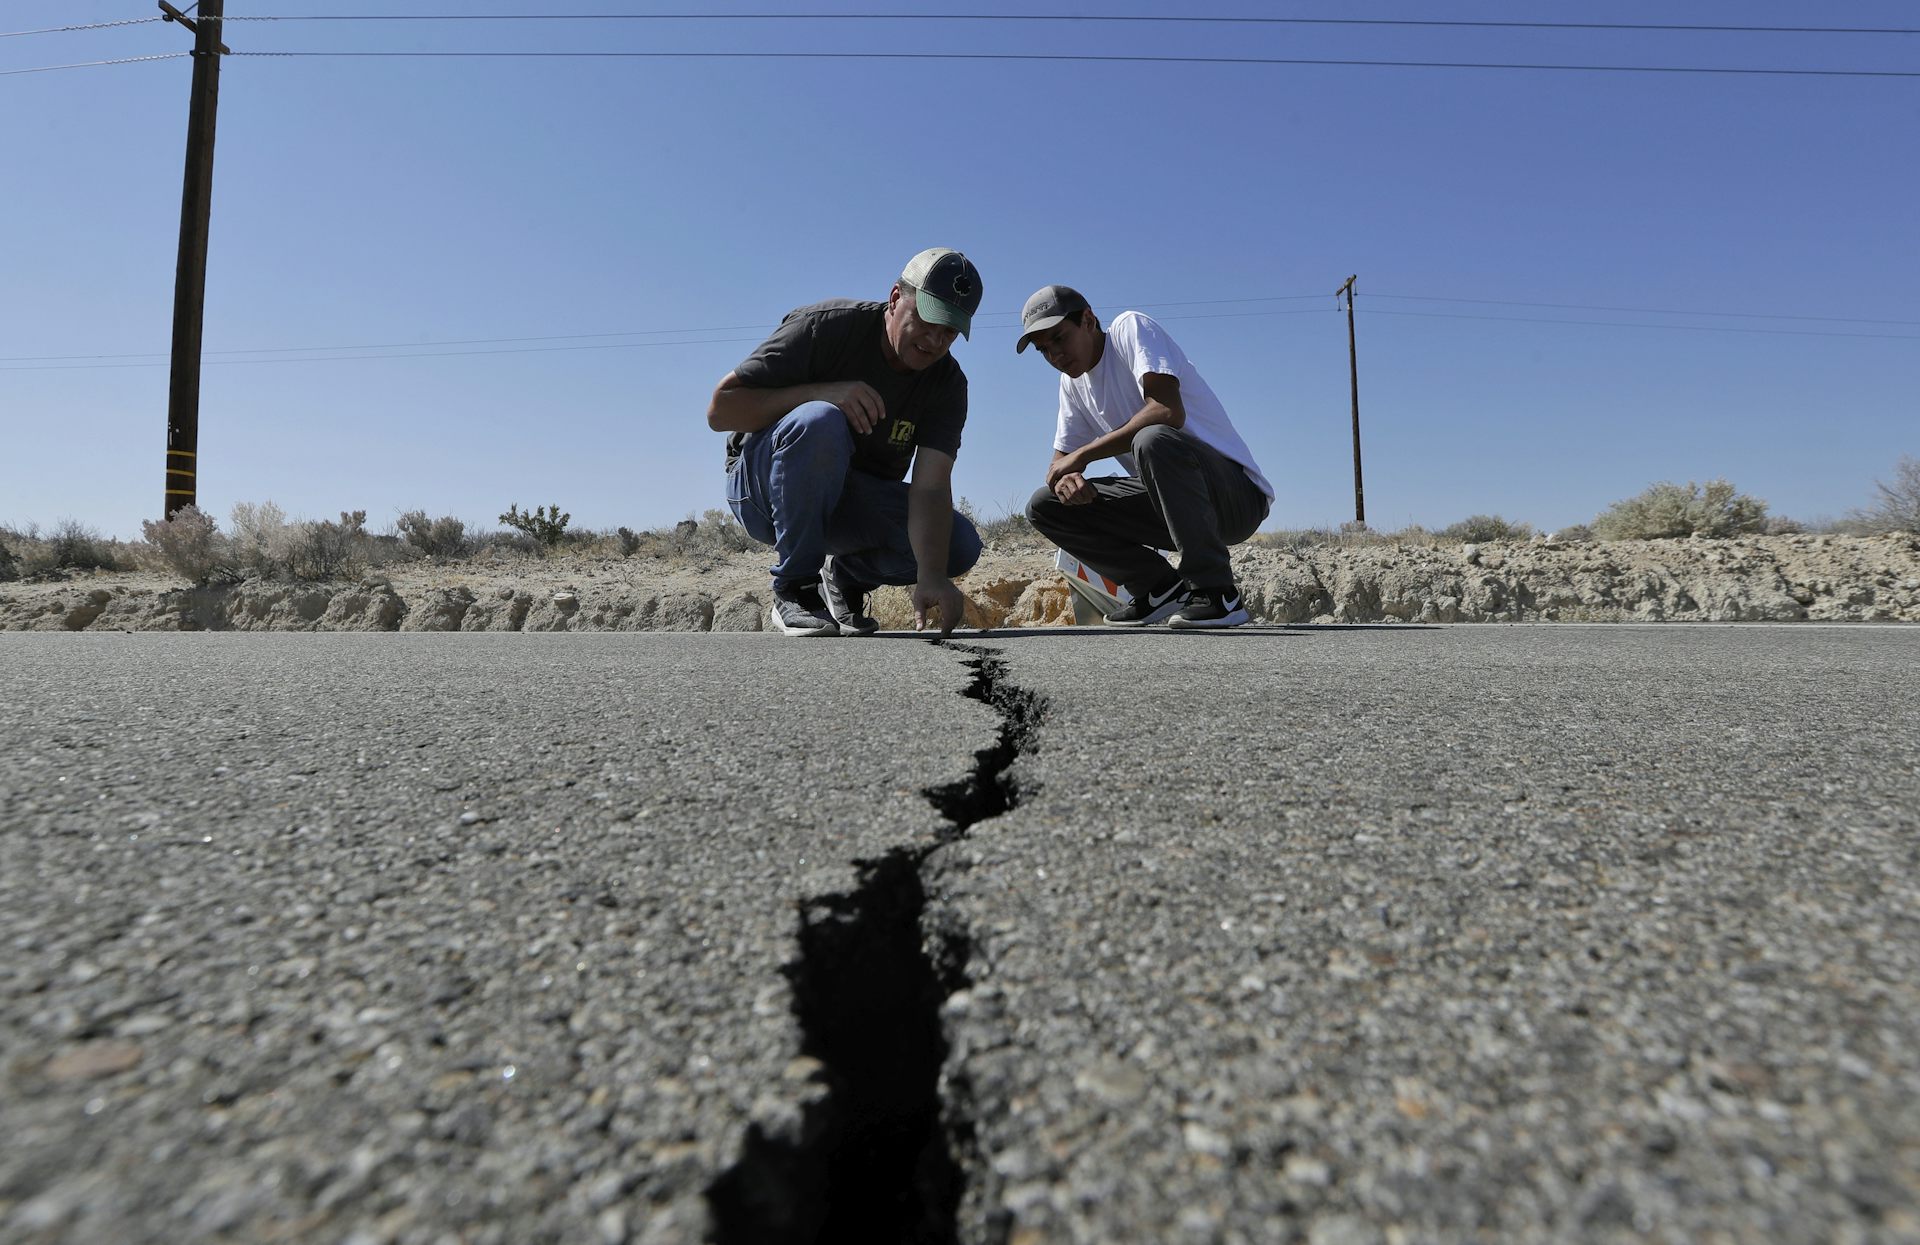 Americans Focus on Responding to Earthquake Damage, Not Preventing It, Because They’re Unaware of Their Risk